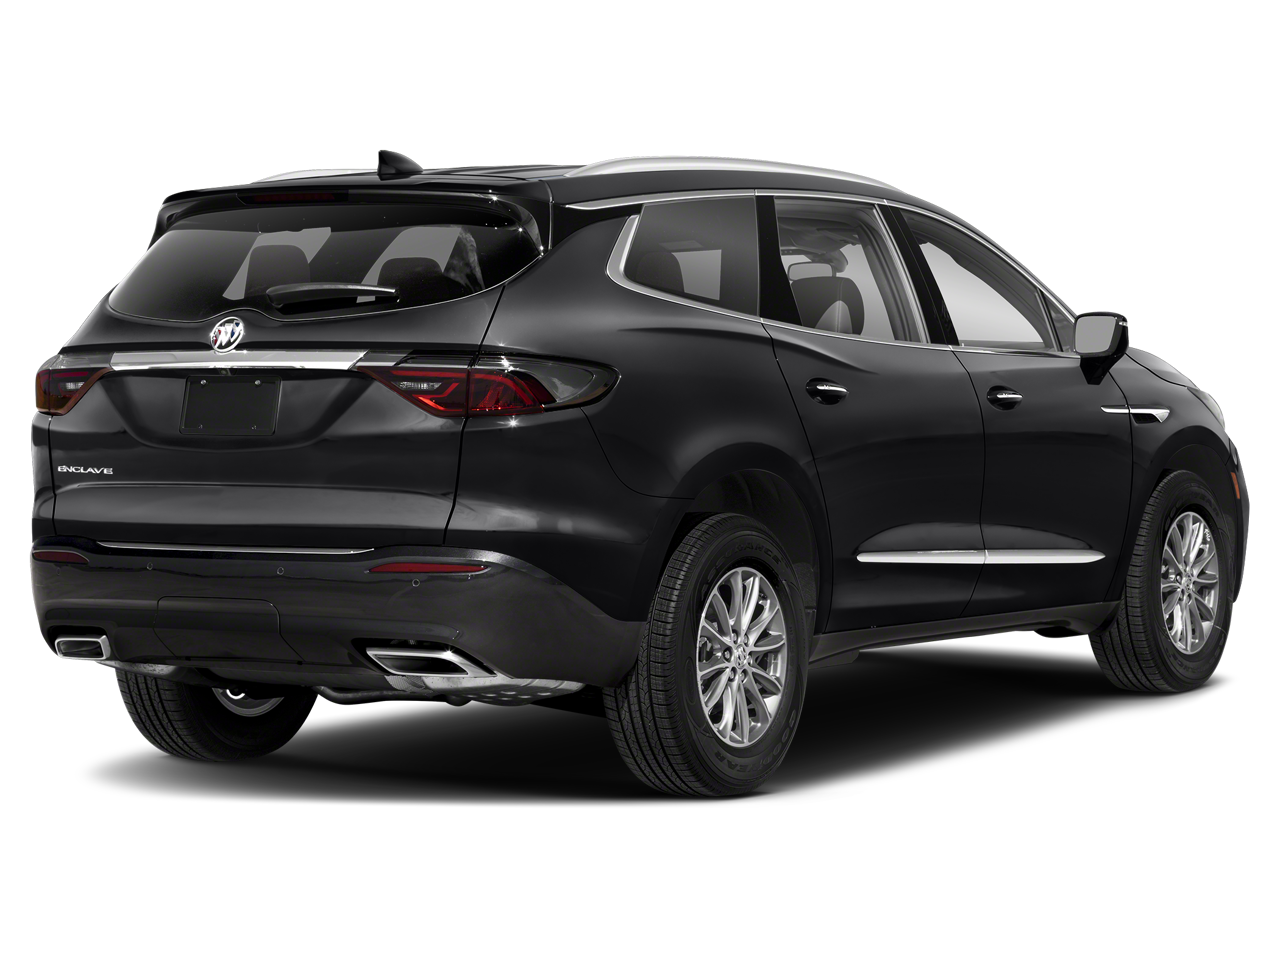 Buick Enclave exterior - Rear Left Angled